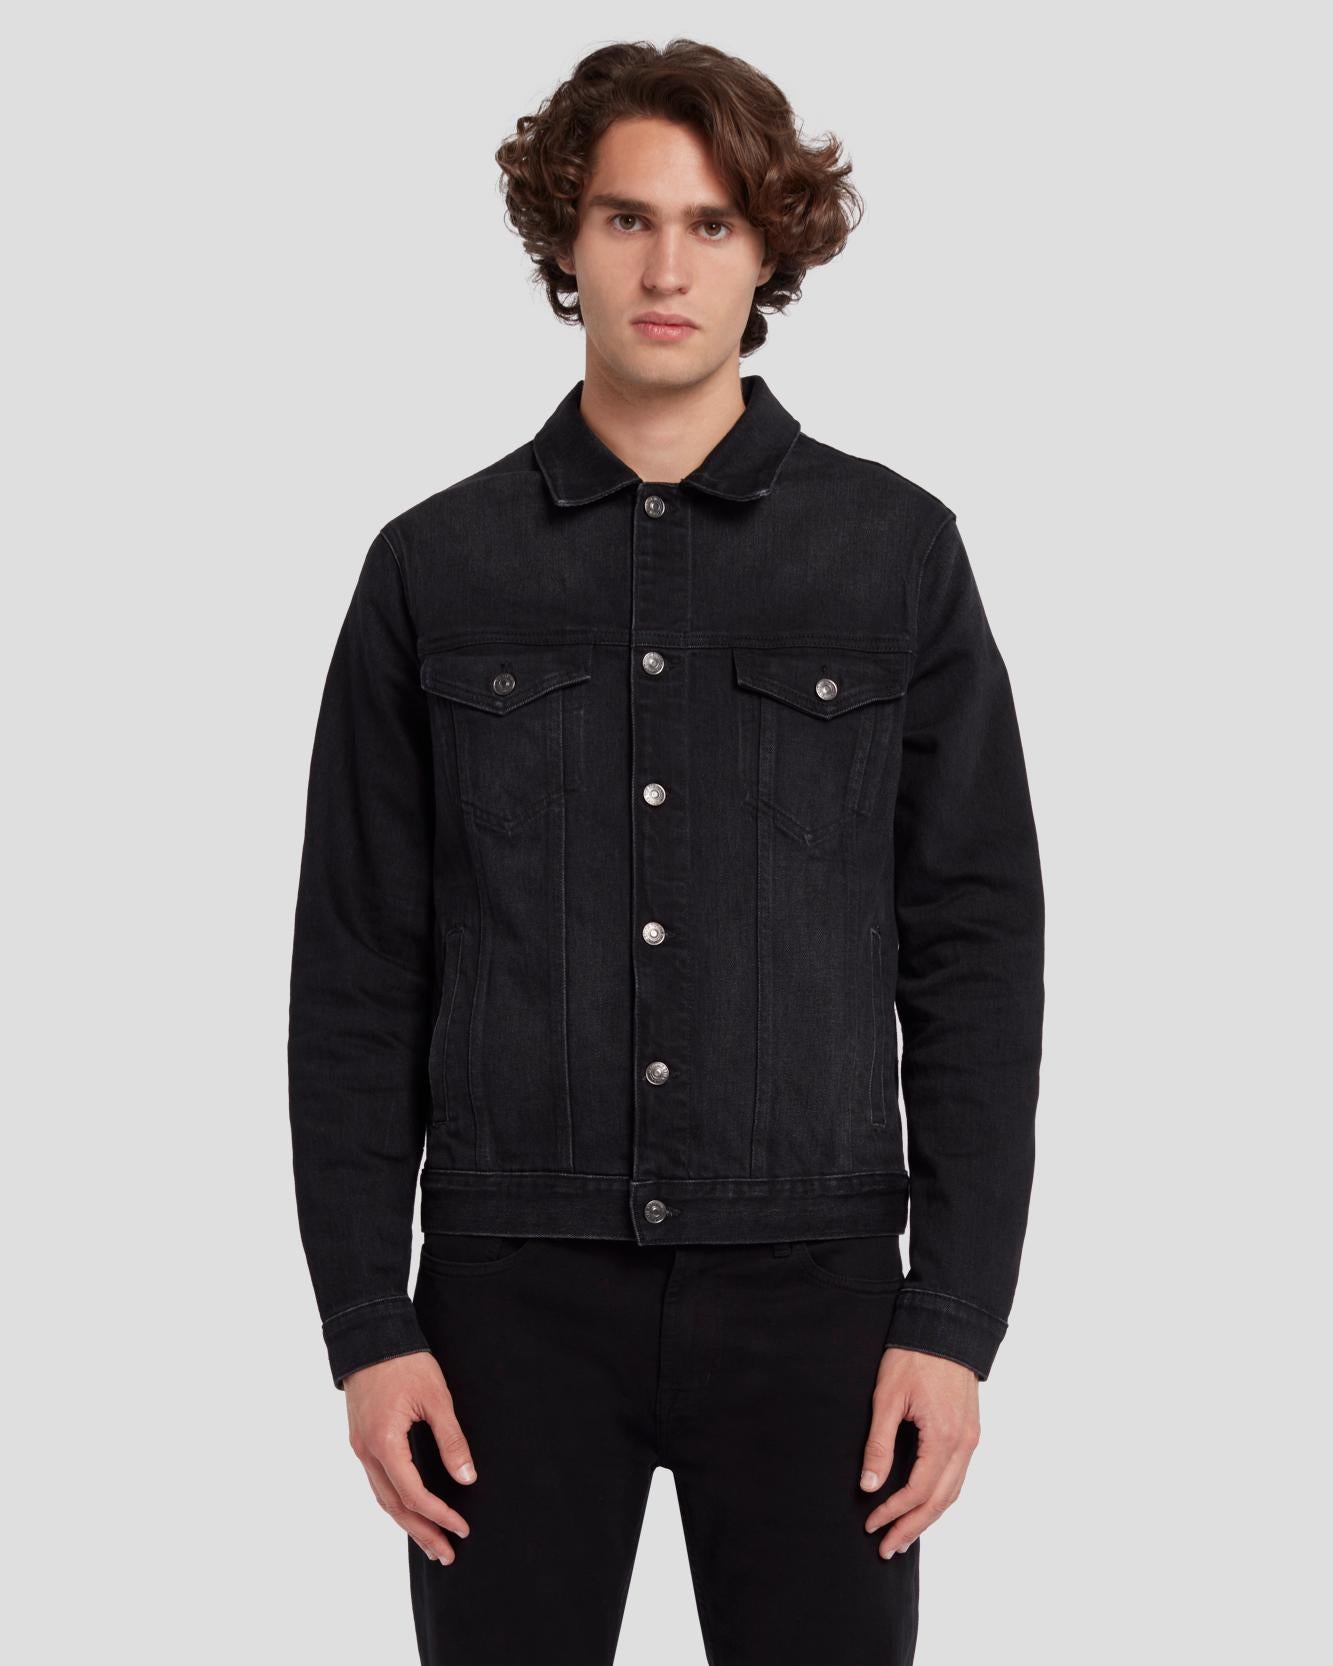 Perfect Trucker Jacket in Blindside | 7 For All Mankind